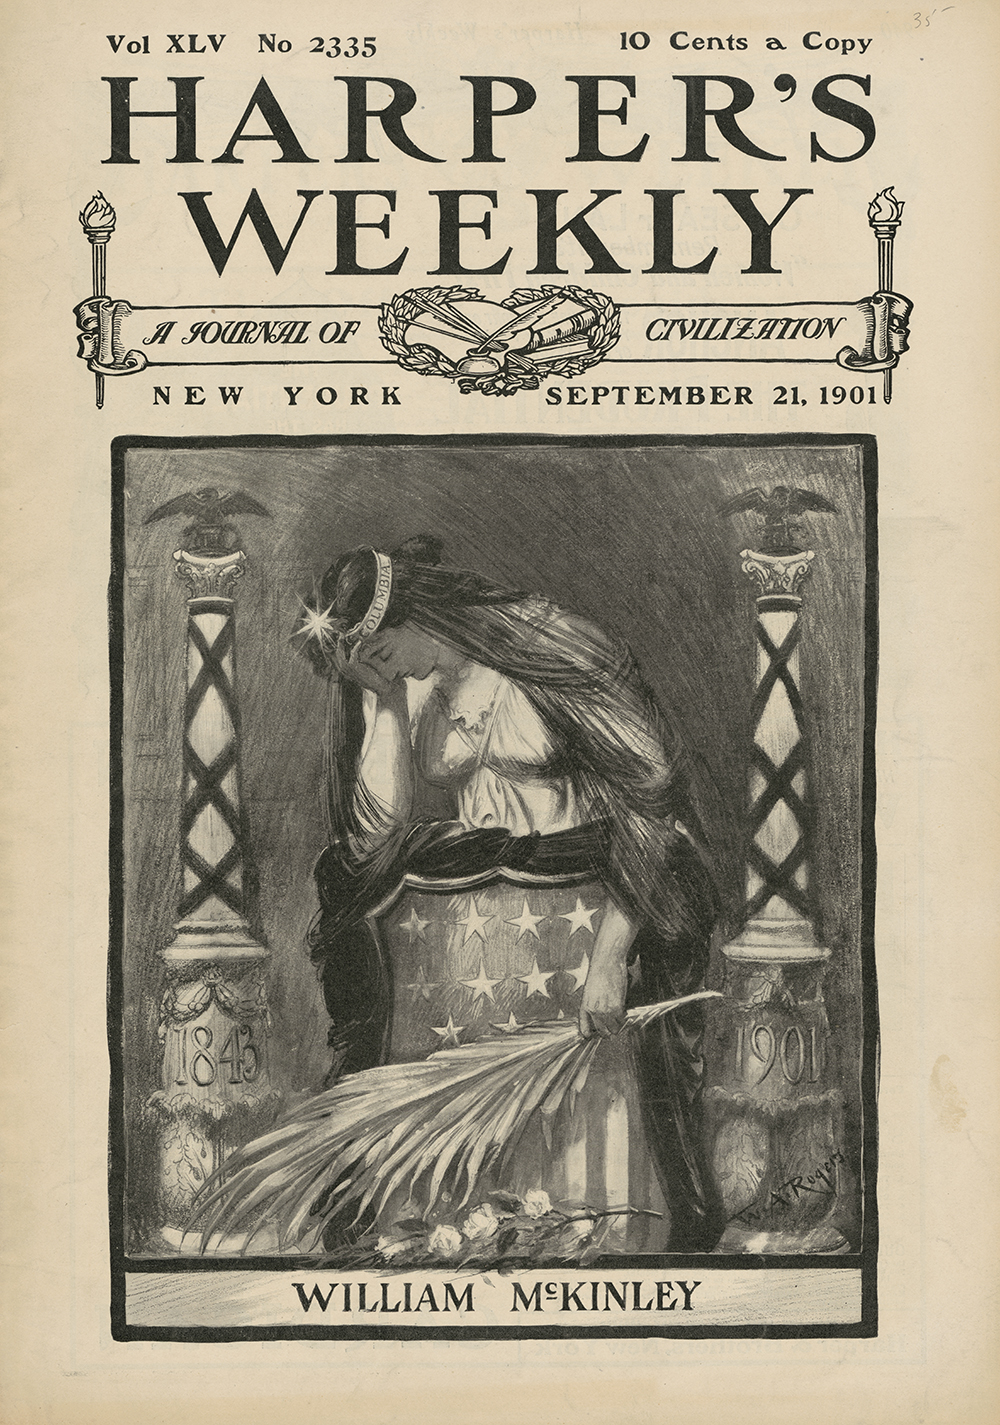 Cover of September 21, 1901, issue of Harper’s Weekly with illustration of America mourning William McKinley by William Allen Rogers. National Portrait Gallery, Smithsonian Institution.